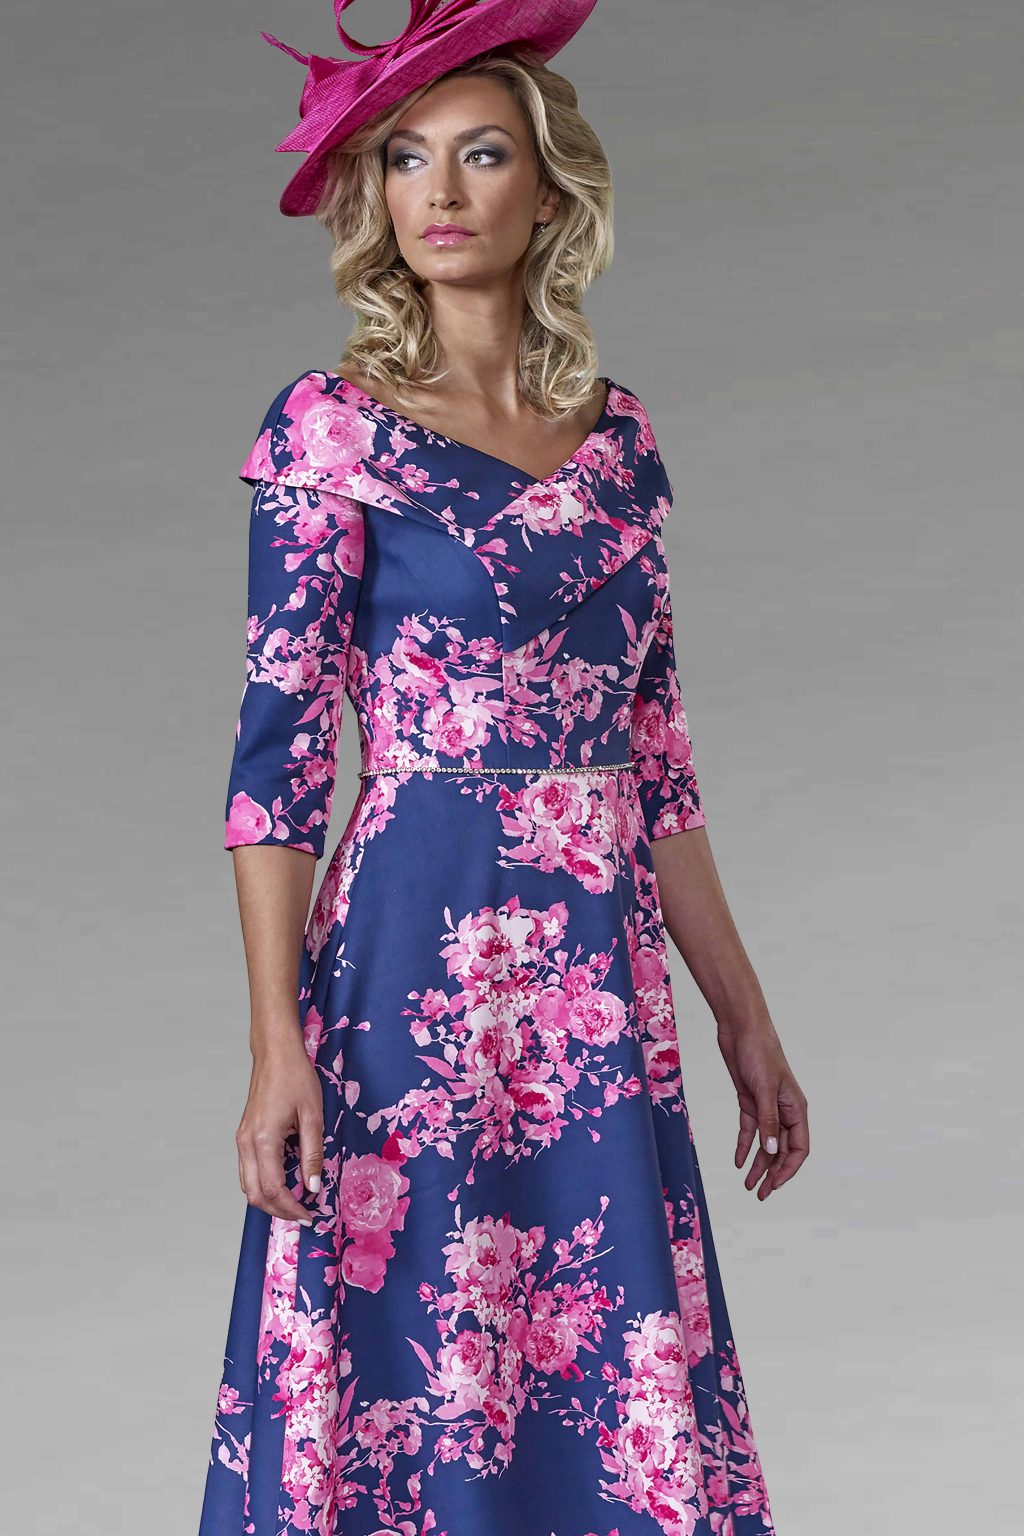 Mid Length Dipped Hem Print Dress. Veromia VO9192 - Catherines of Partick